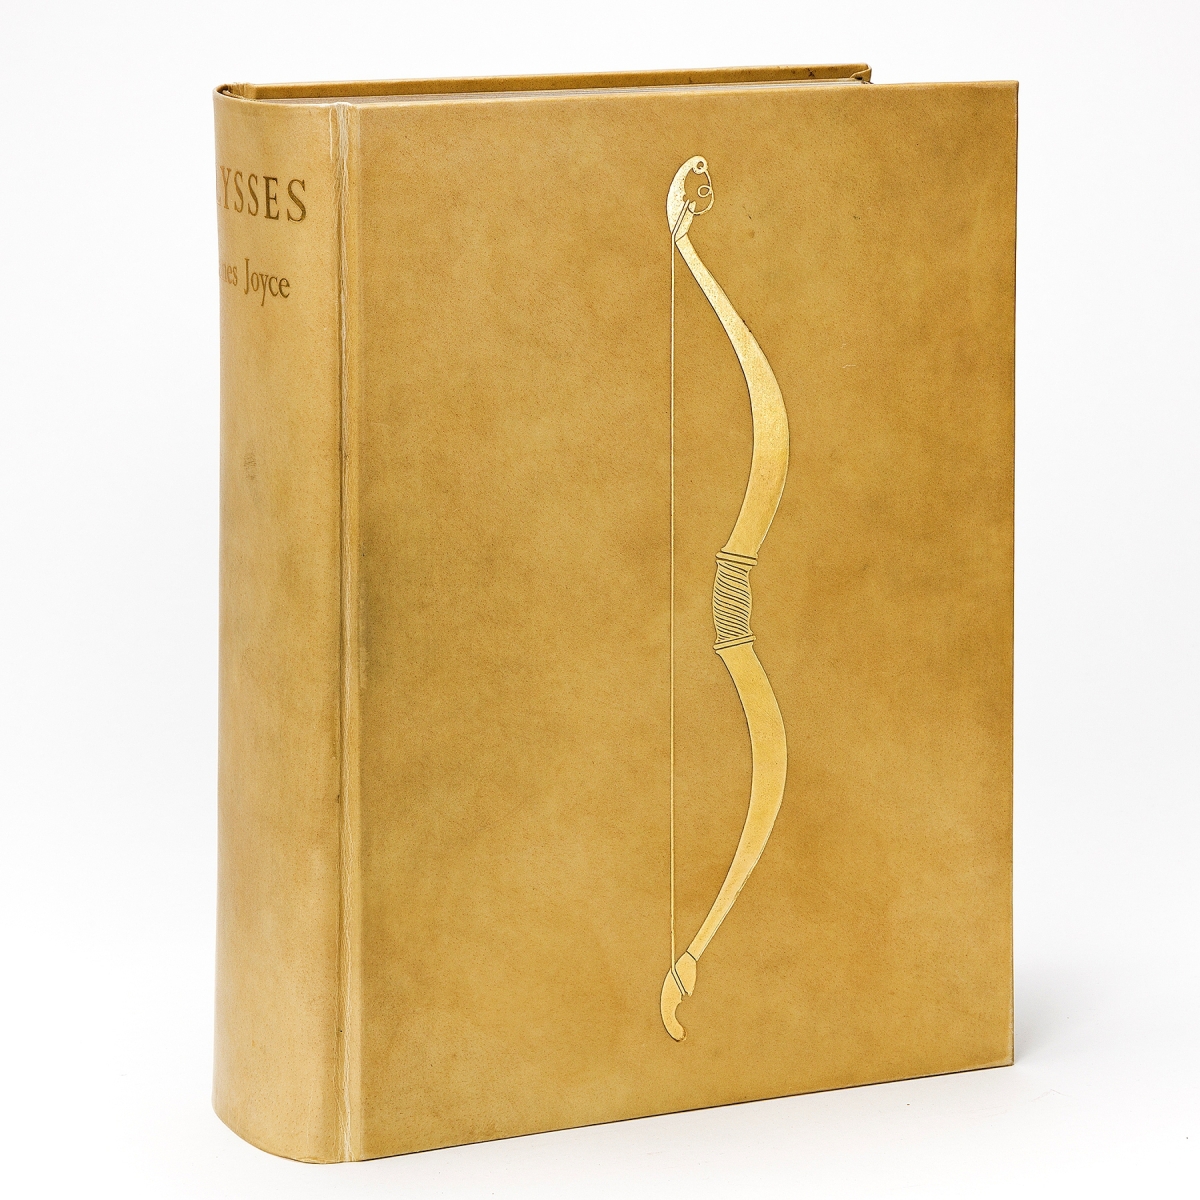 James Joyce, Ulysses, deluxe limited issue, signed, London, 1936, sold for $21,250.